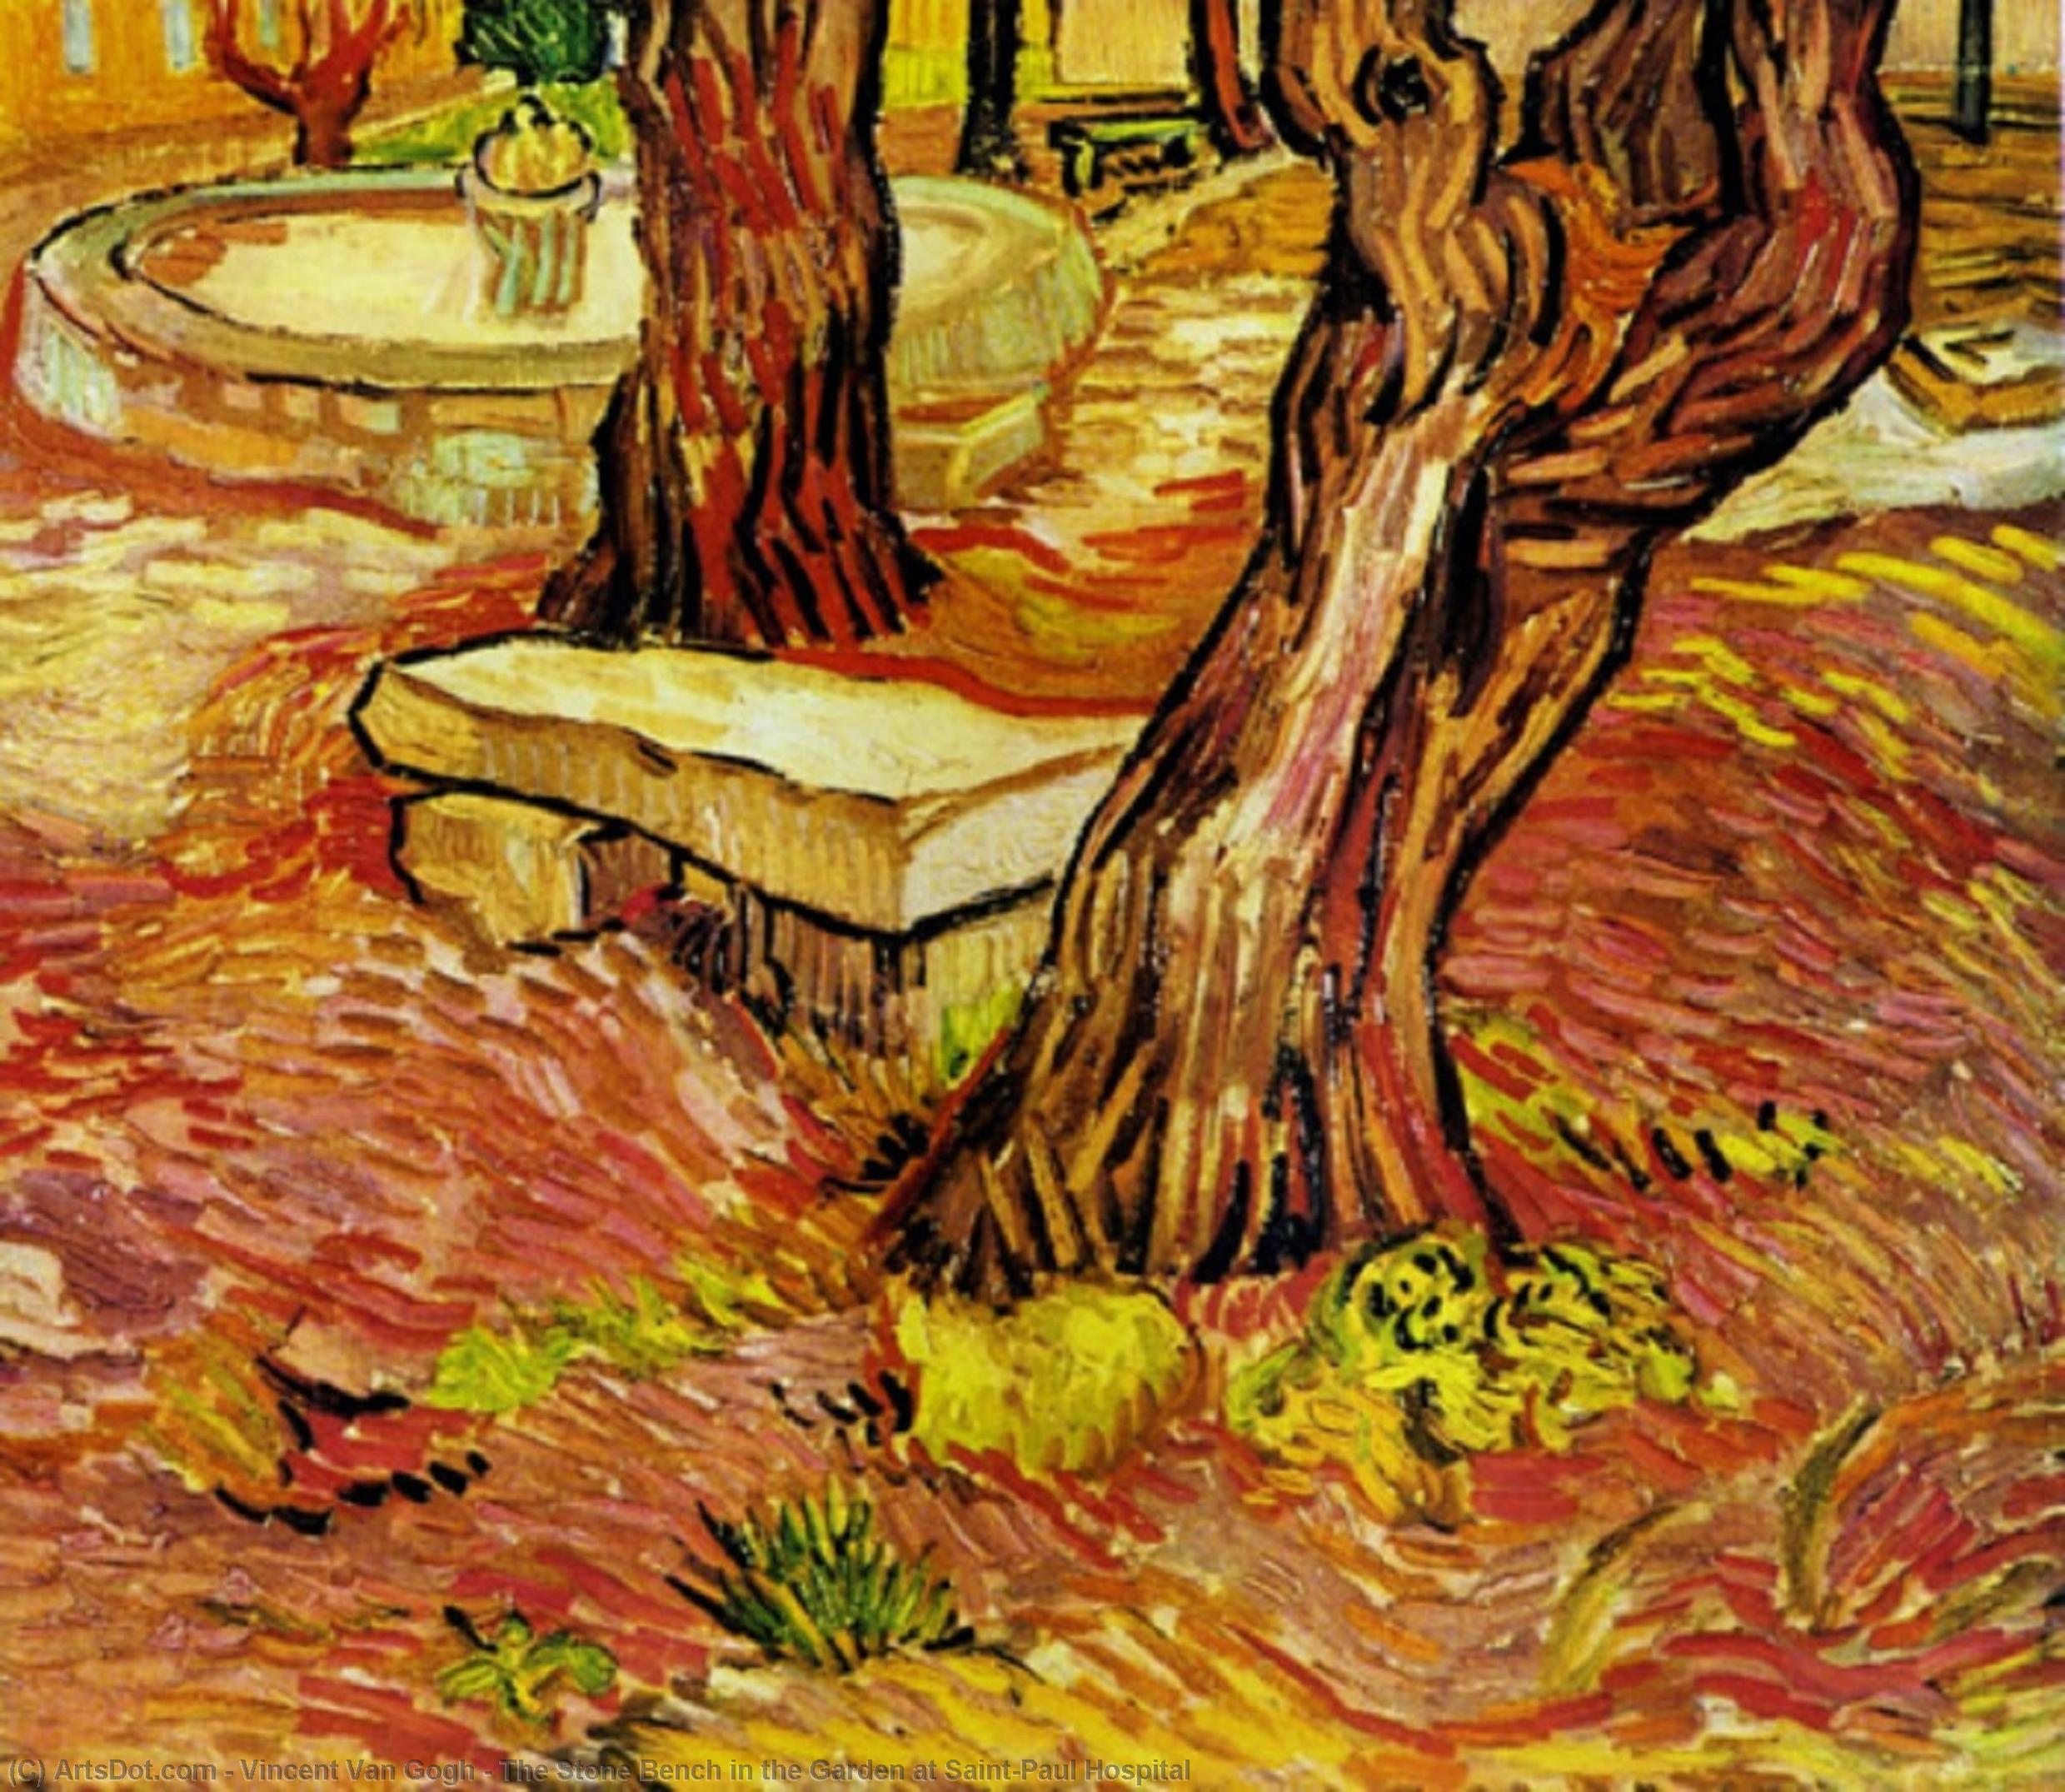 Buy Museum Art Reproductions The Stone Bench in the Garden at Saint-Paul Hospital, 1889 by Vincent Van Gogh (1853-1890, Netherlands) | ArtsDot.com